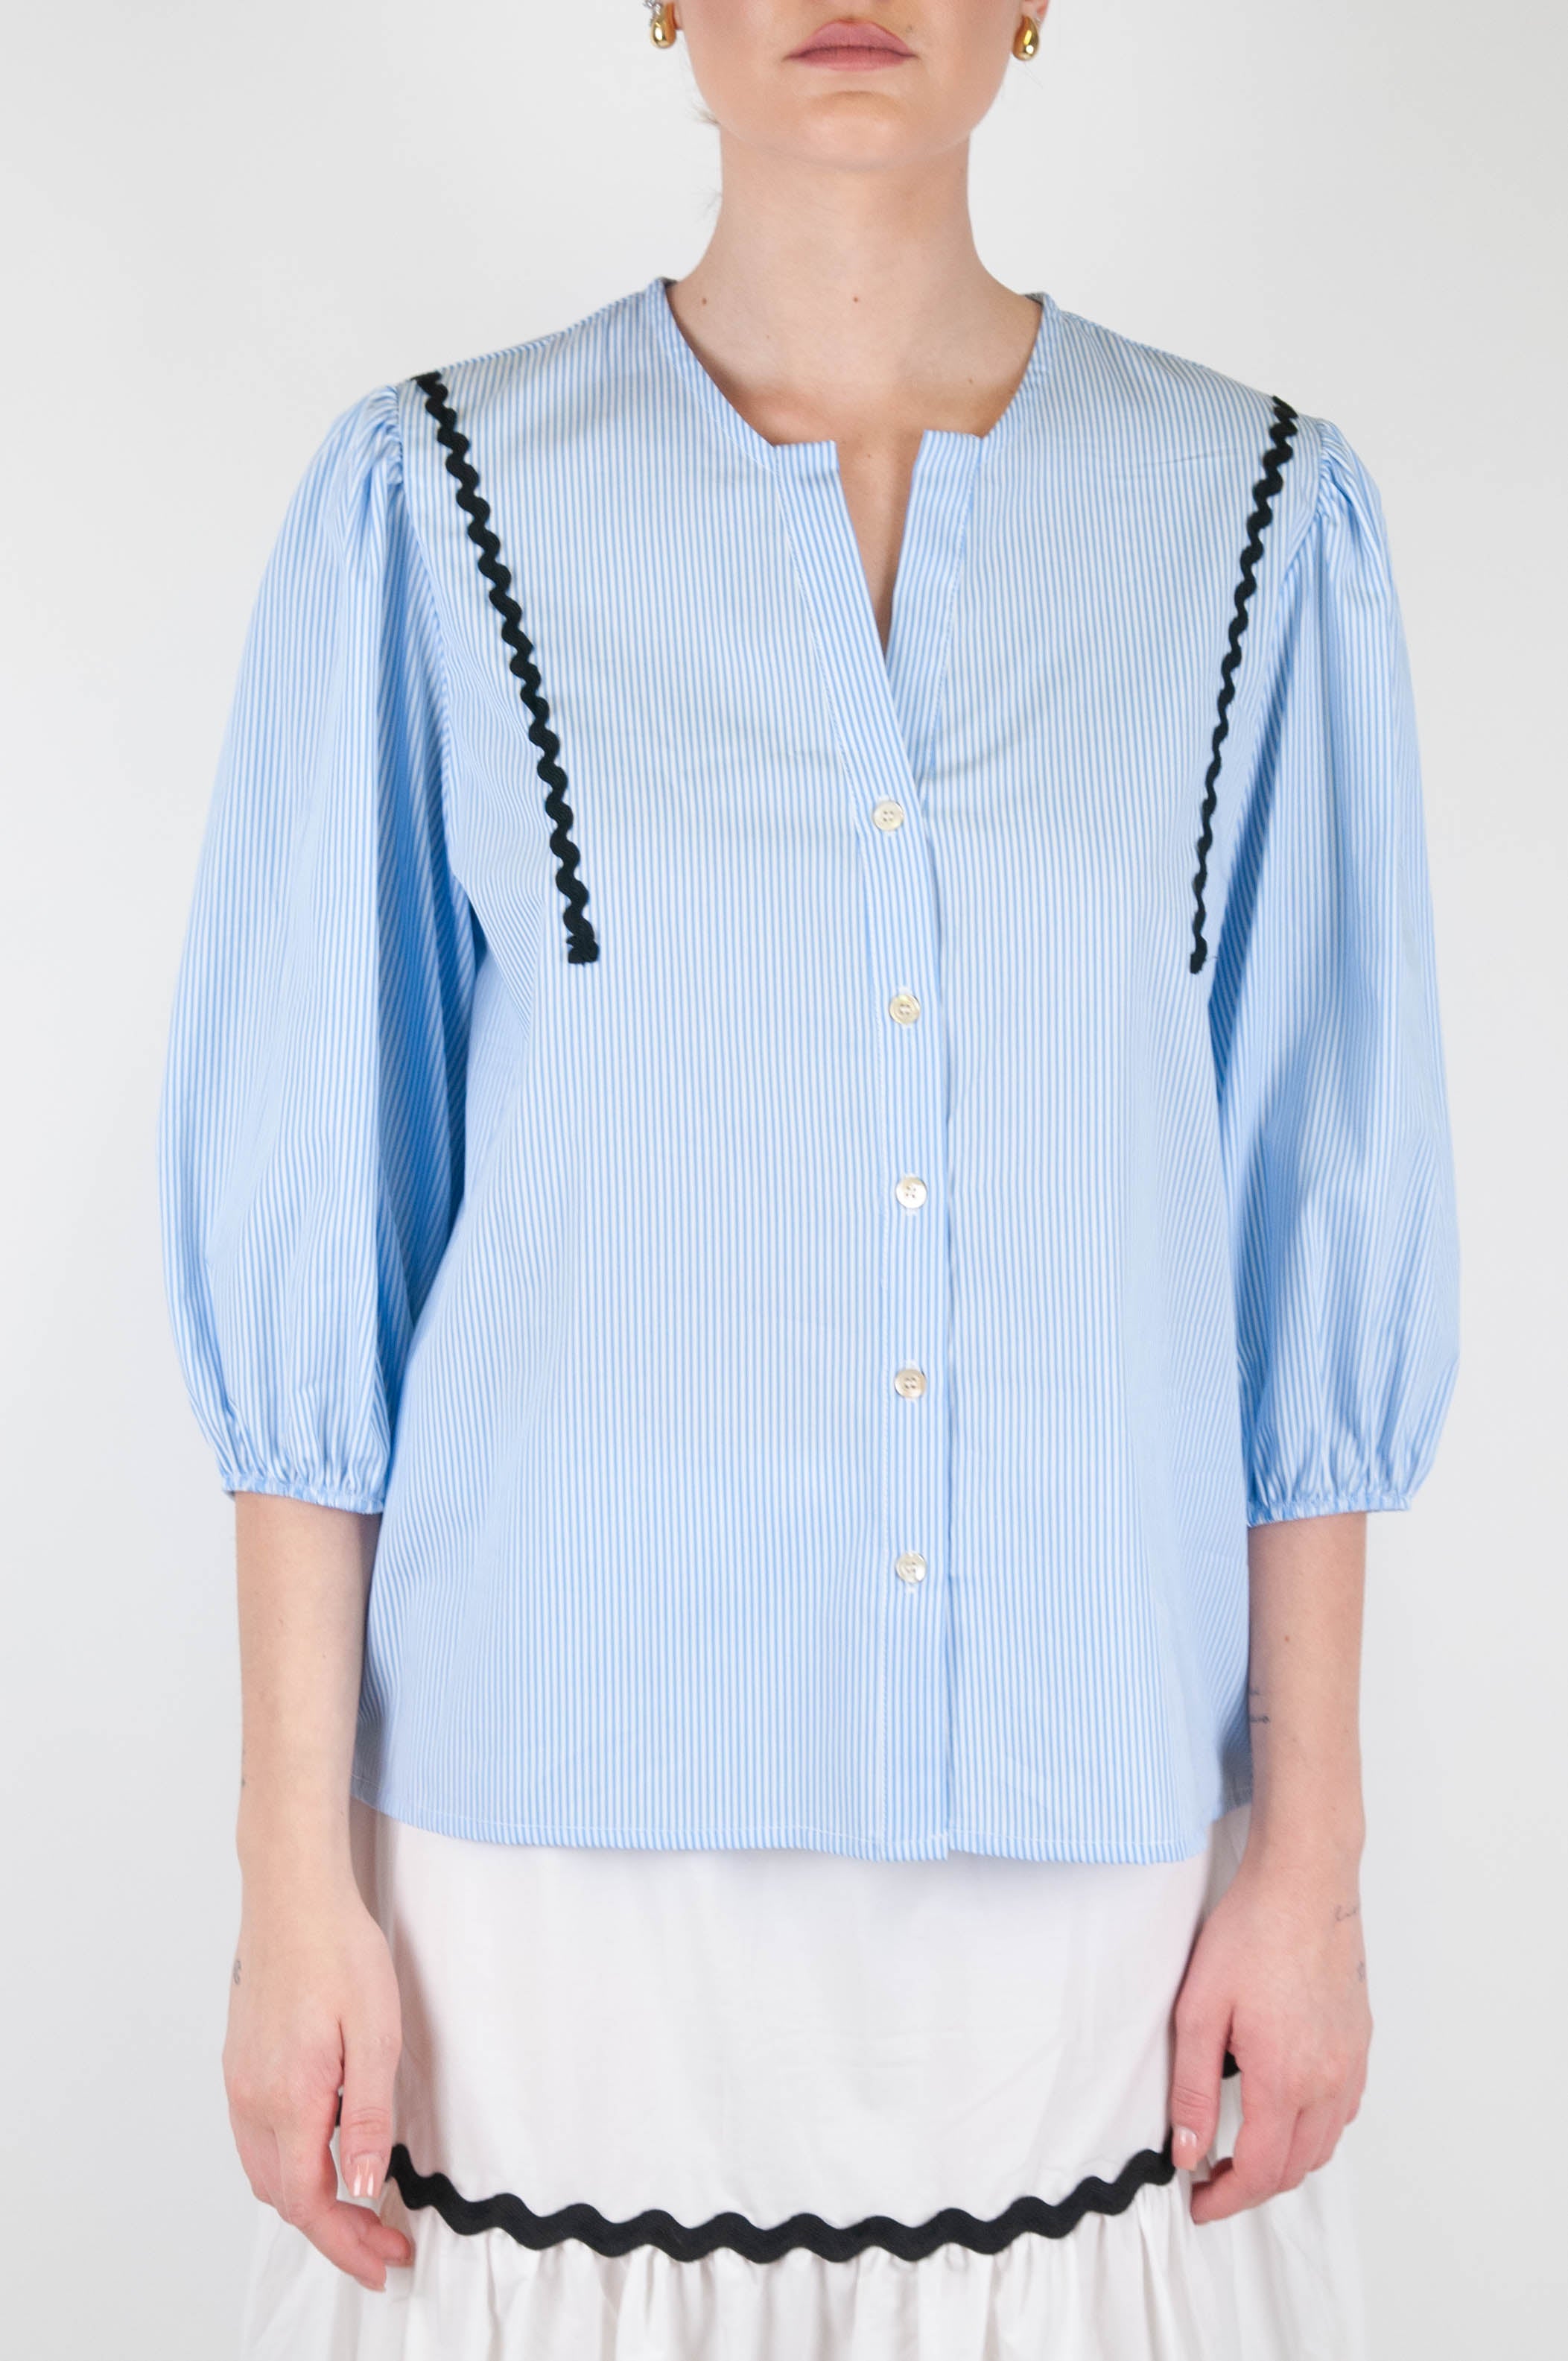 Tension in - Striped shirt with diagonal contrasting embroidery and mandarin collar